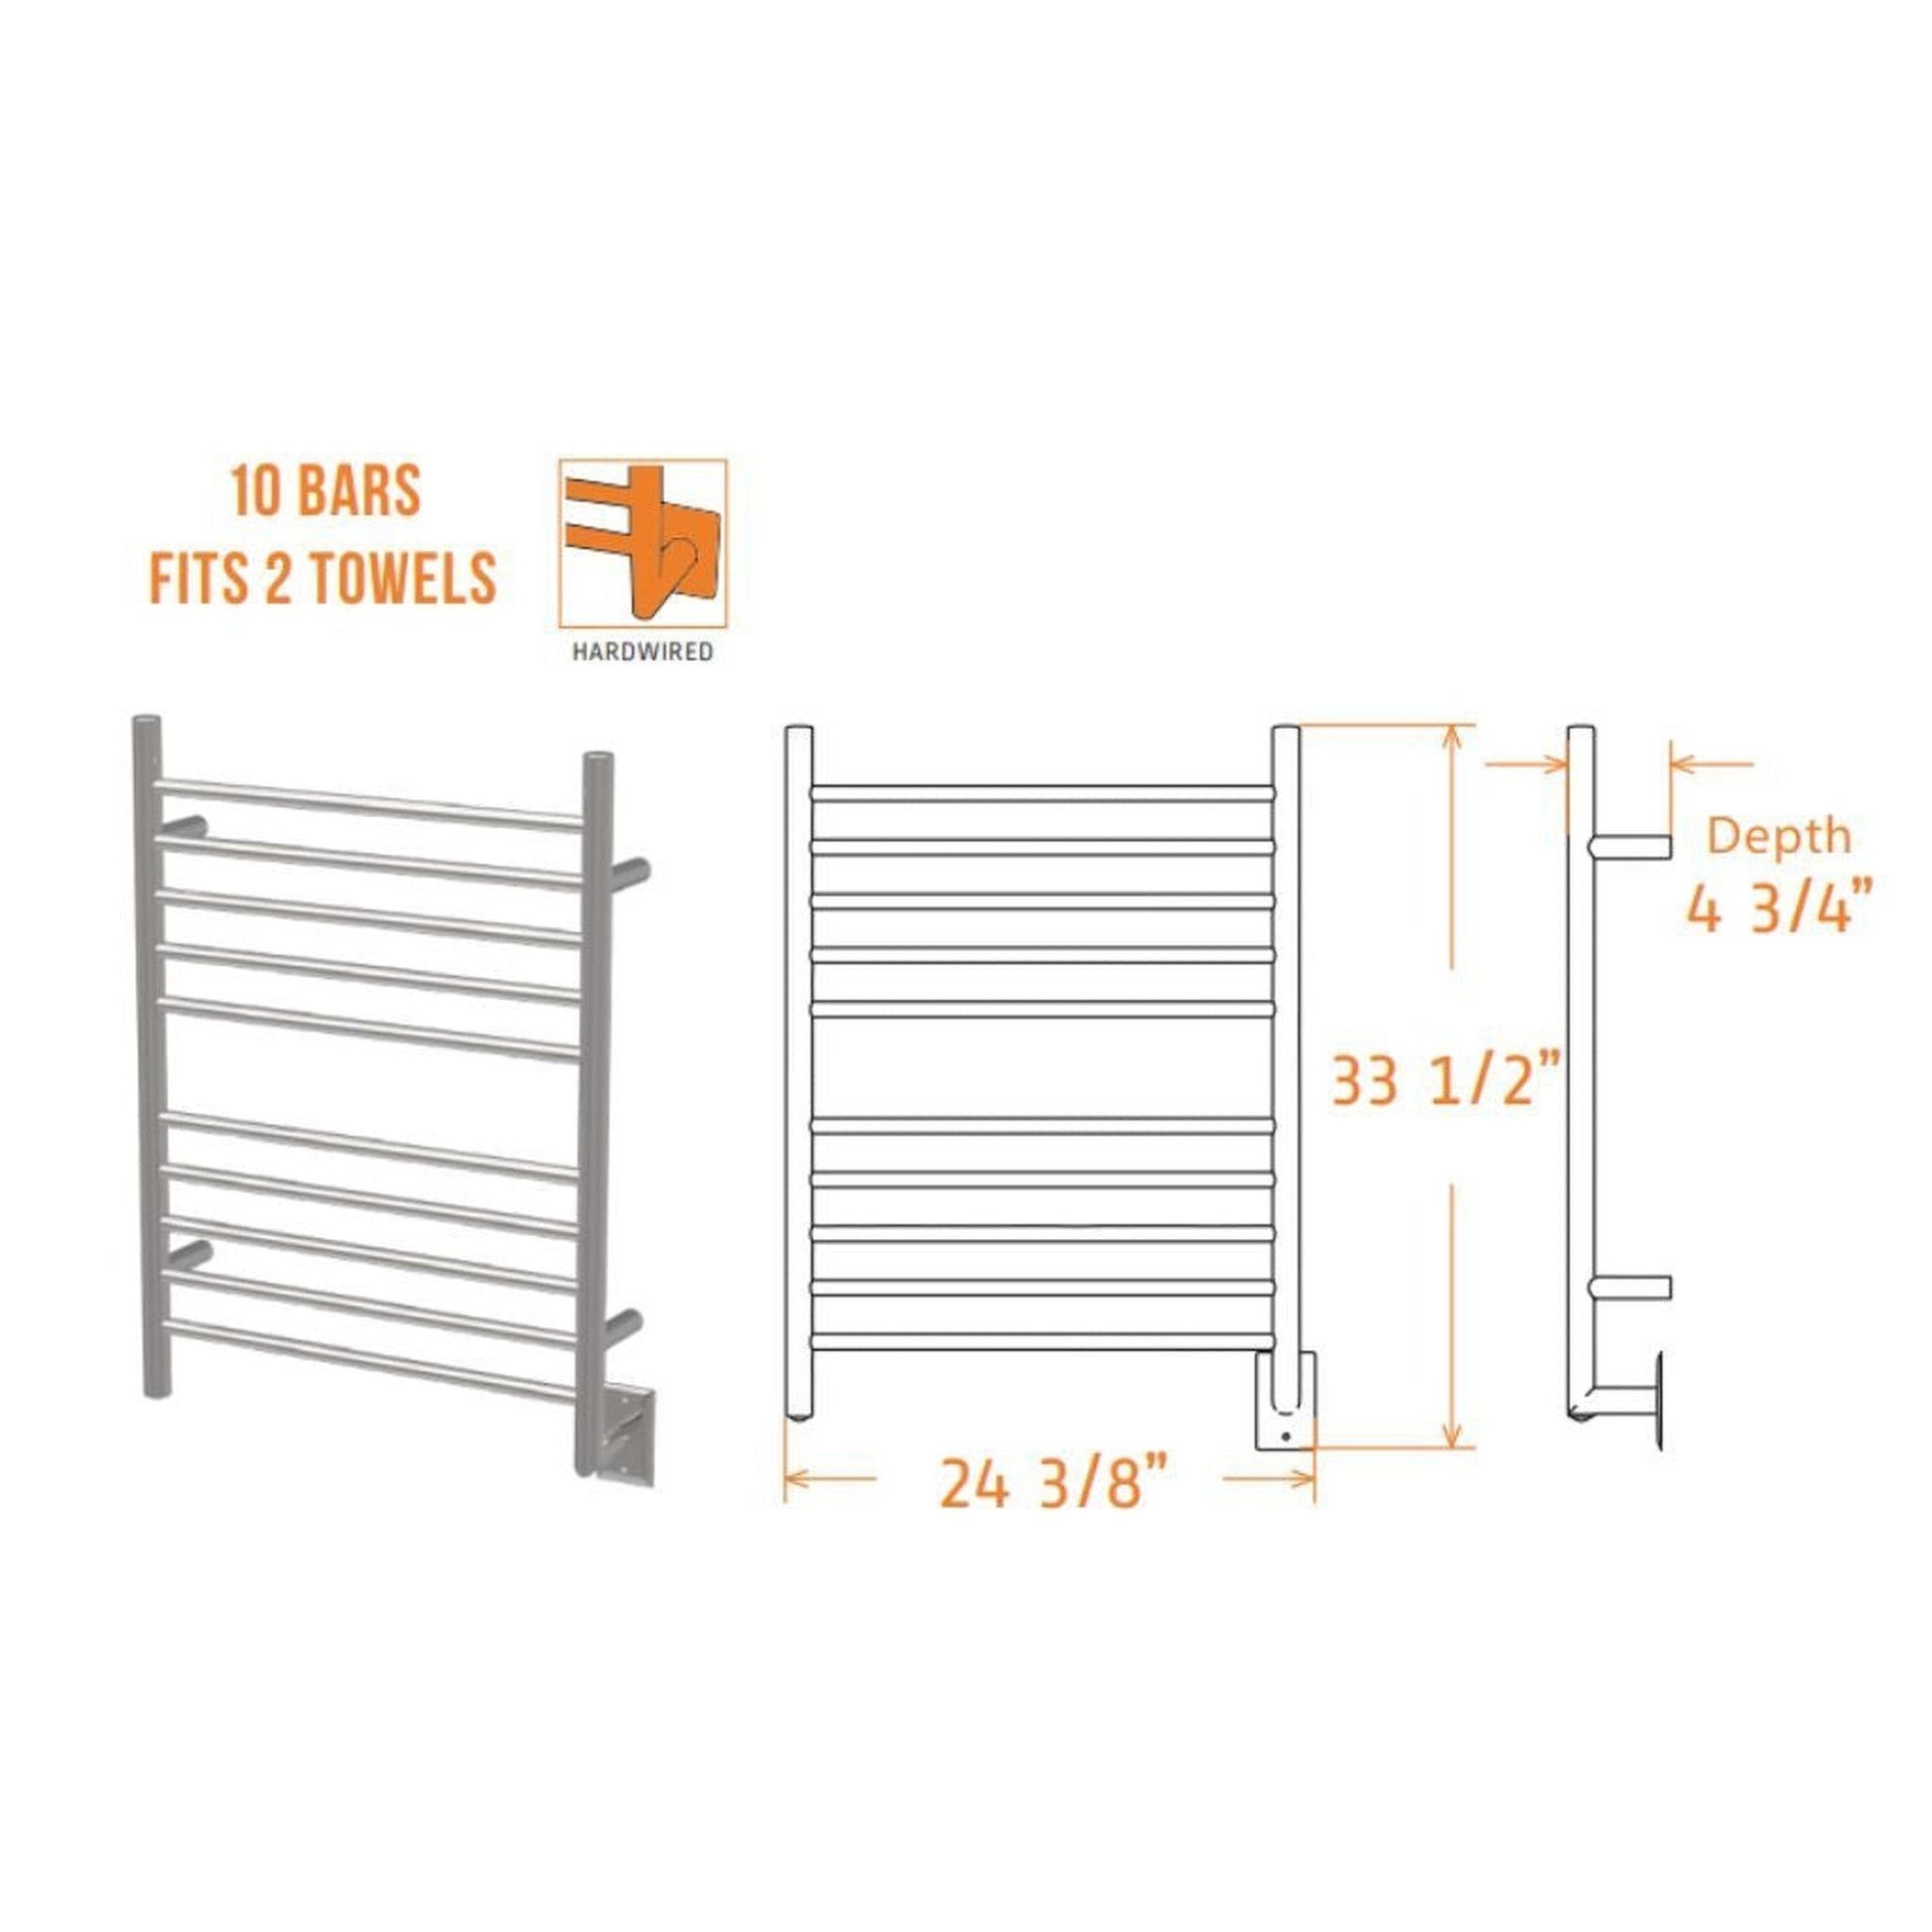 Amba Radiant Curved 10-Bar Brushed Stainless Steel Hardwired Towel Warmer With Integrated On/Off Switch